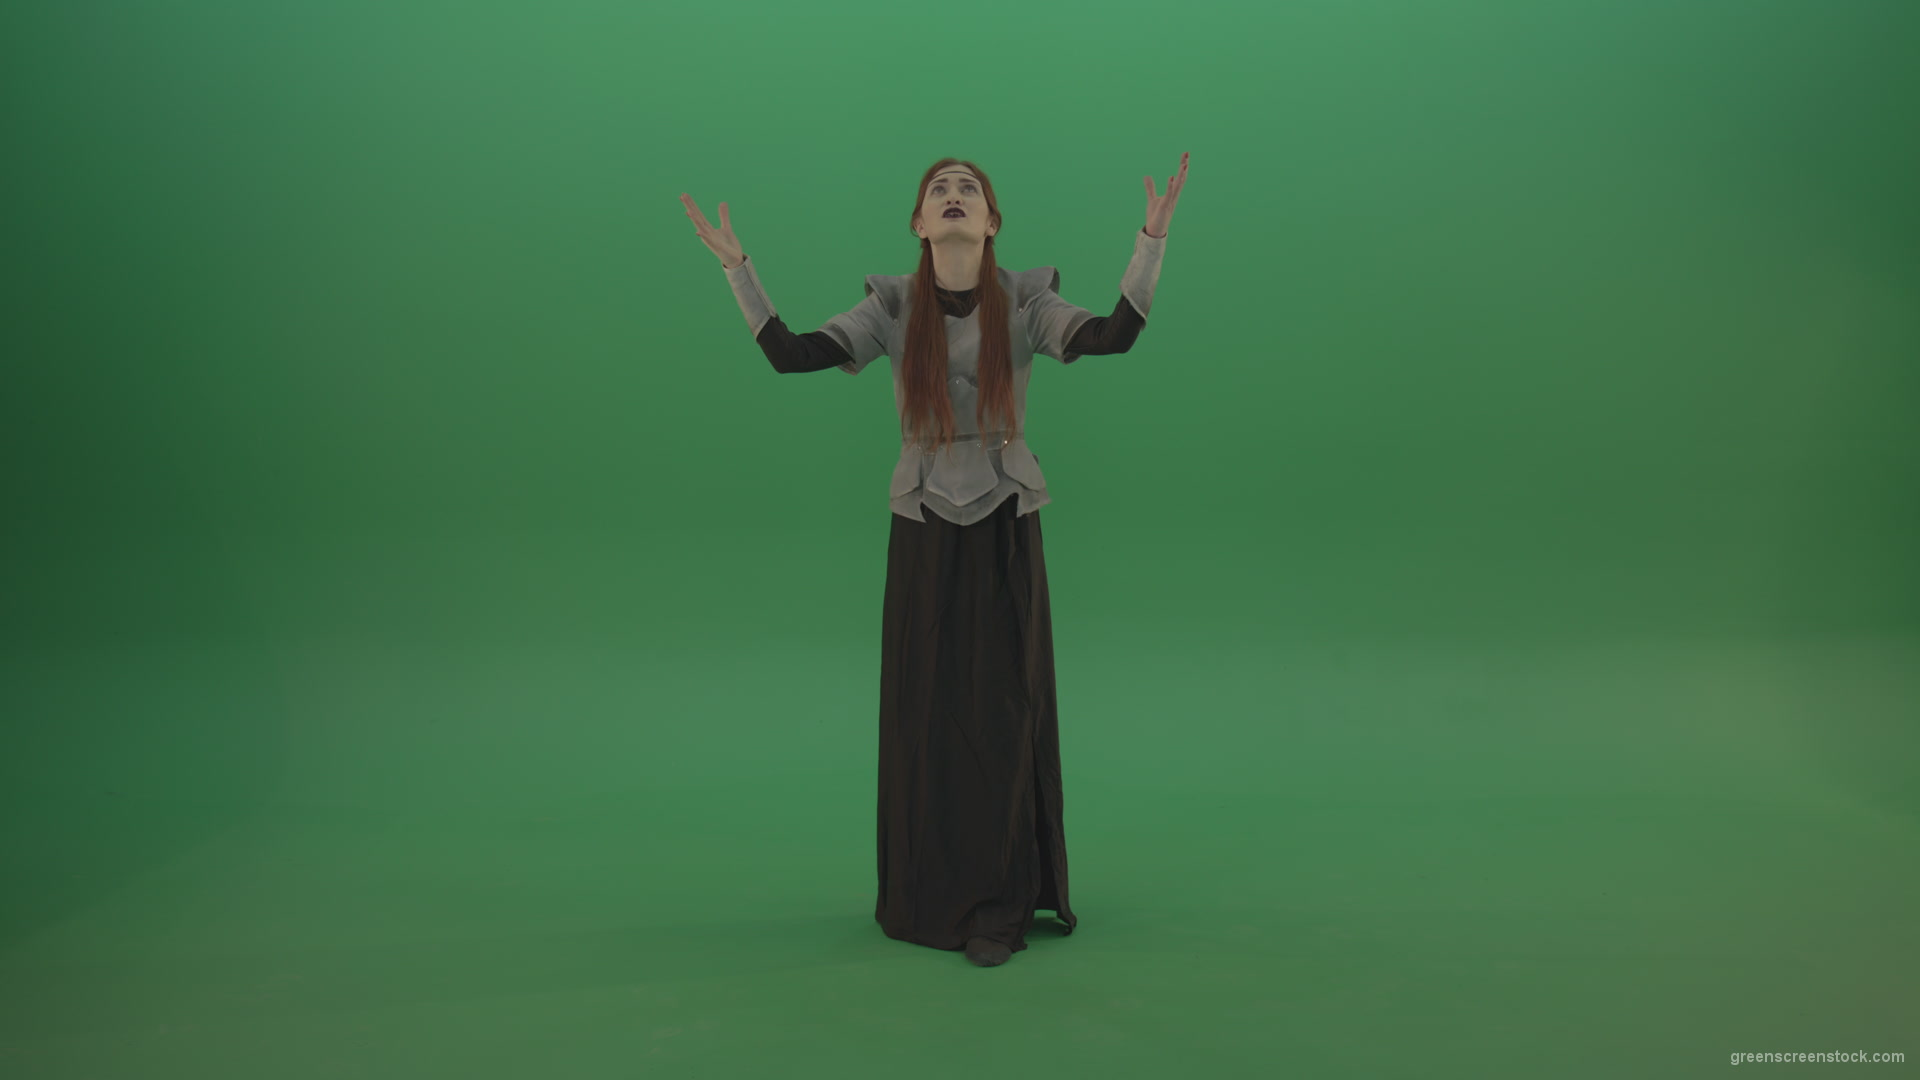 Redheaded-girl-in-full-height-in-medieval-warrior-clothing-asks-for-help-from-the-gods-on-green-screen_008 Green Screen Stock